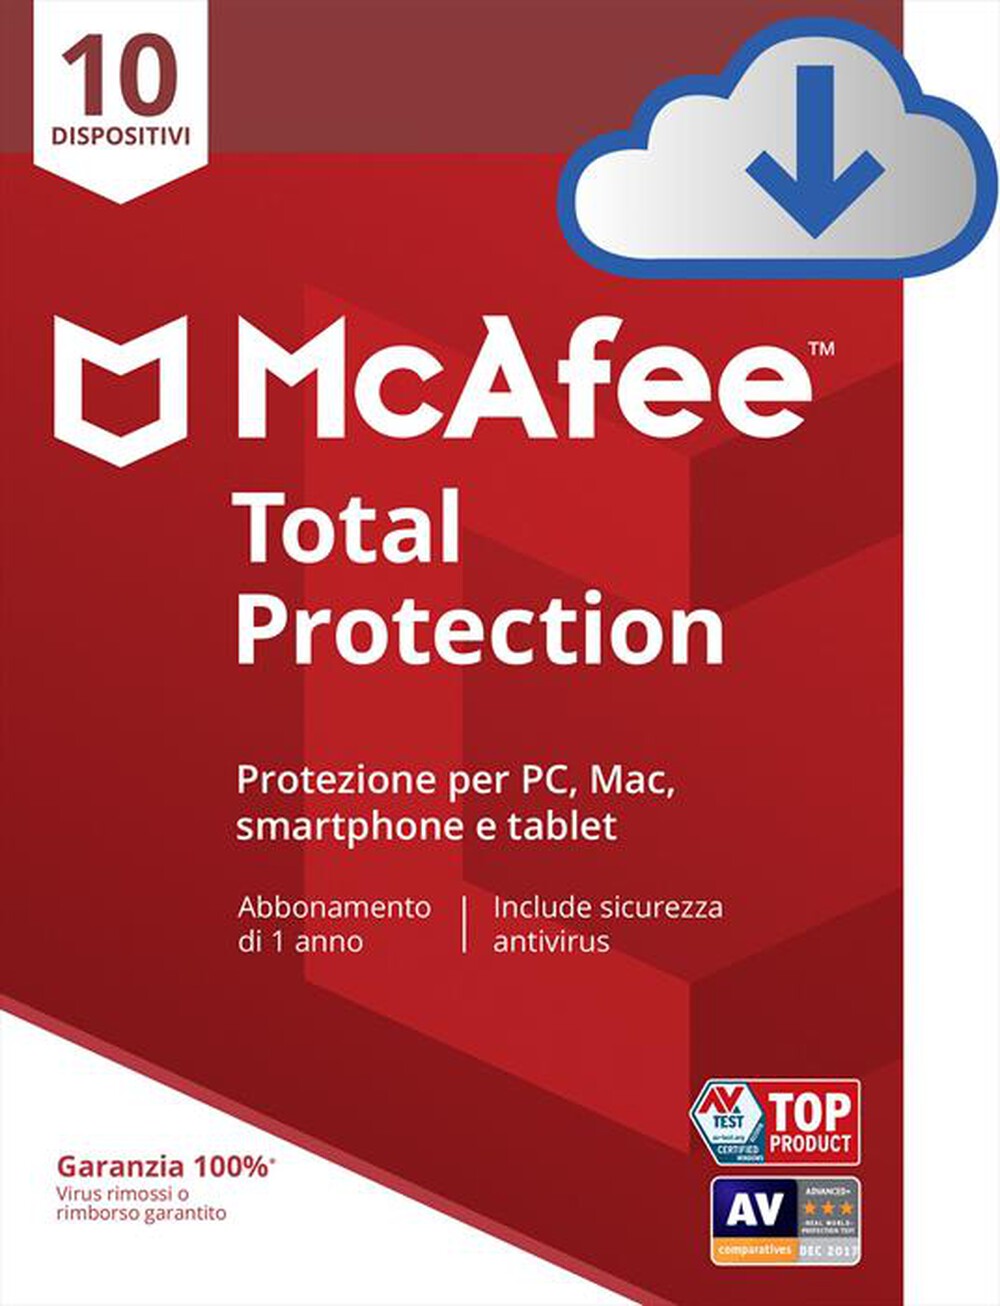 "MCAFEE - Total Protection 10D"